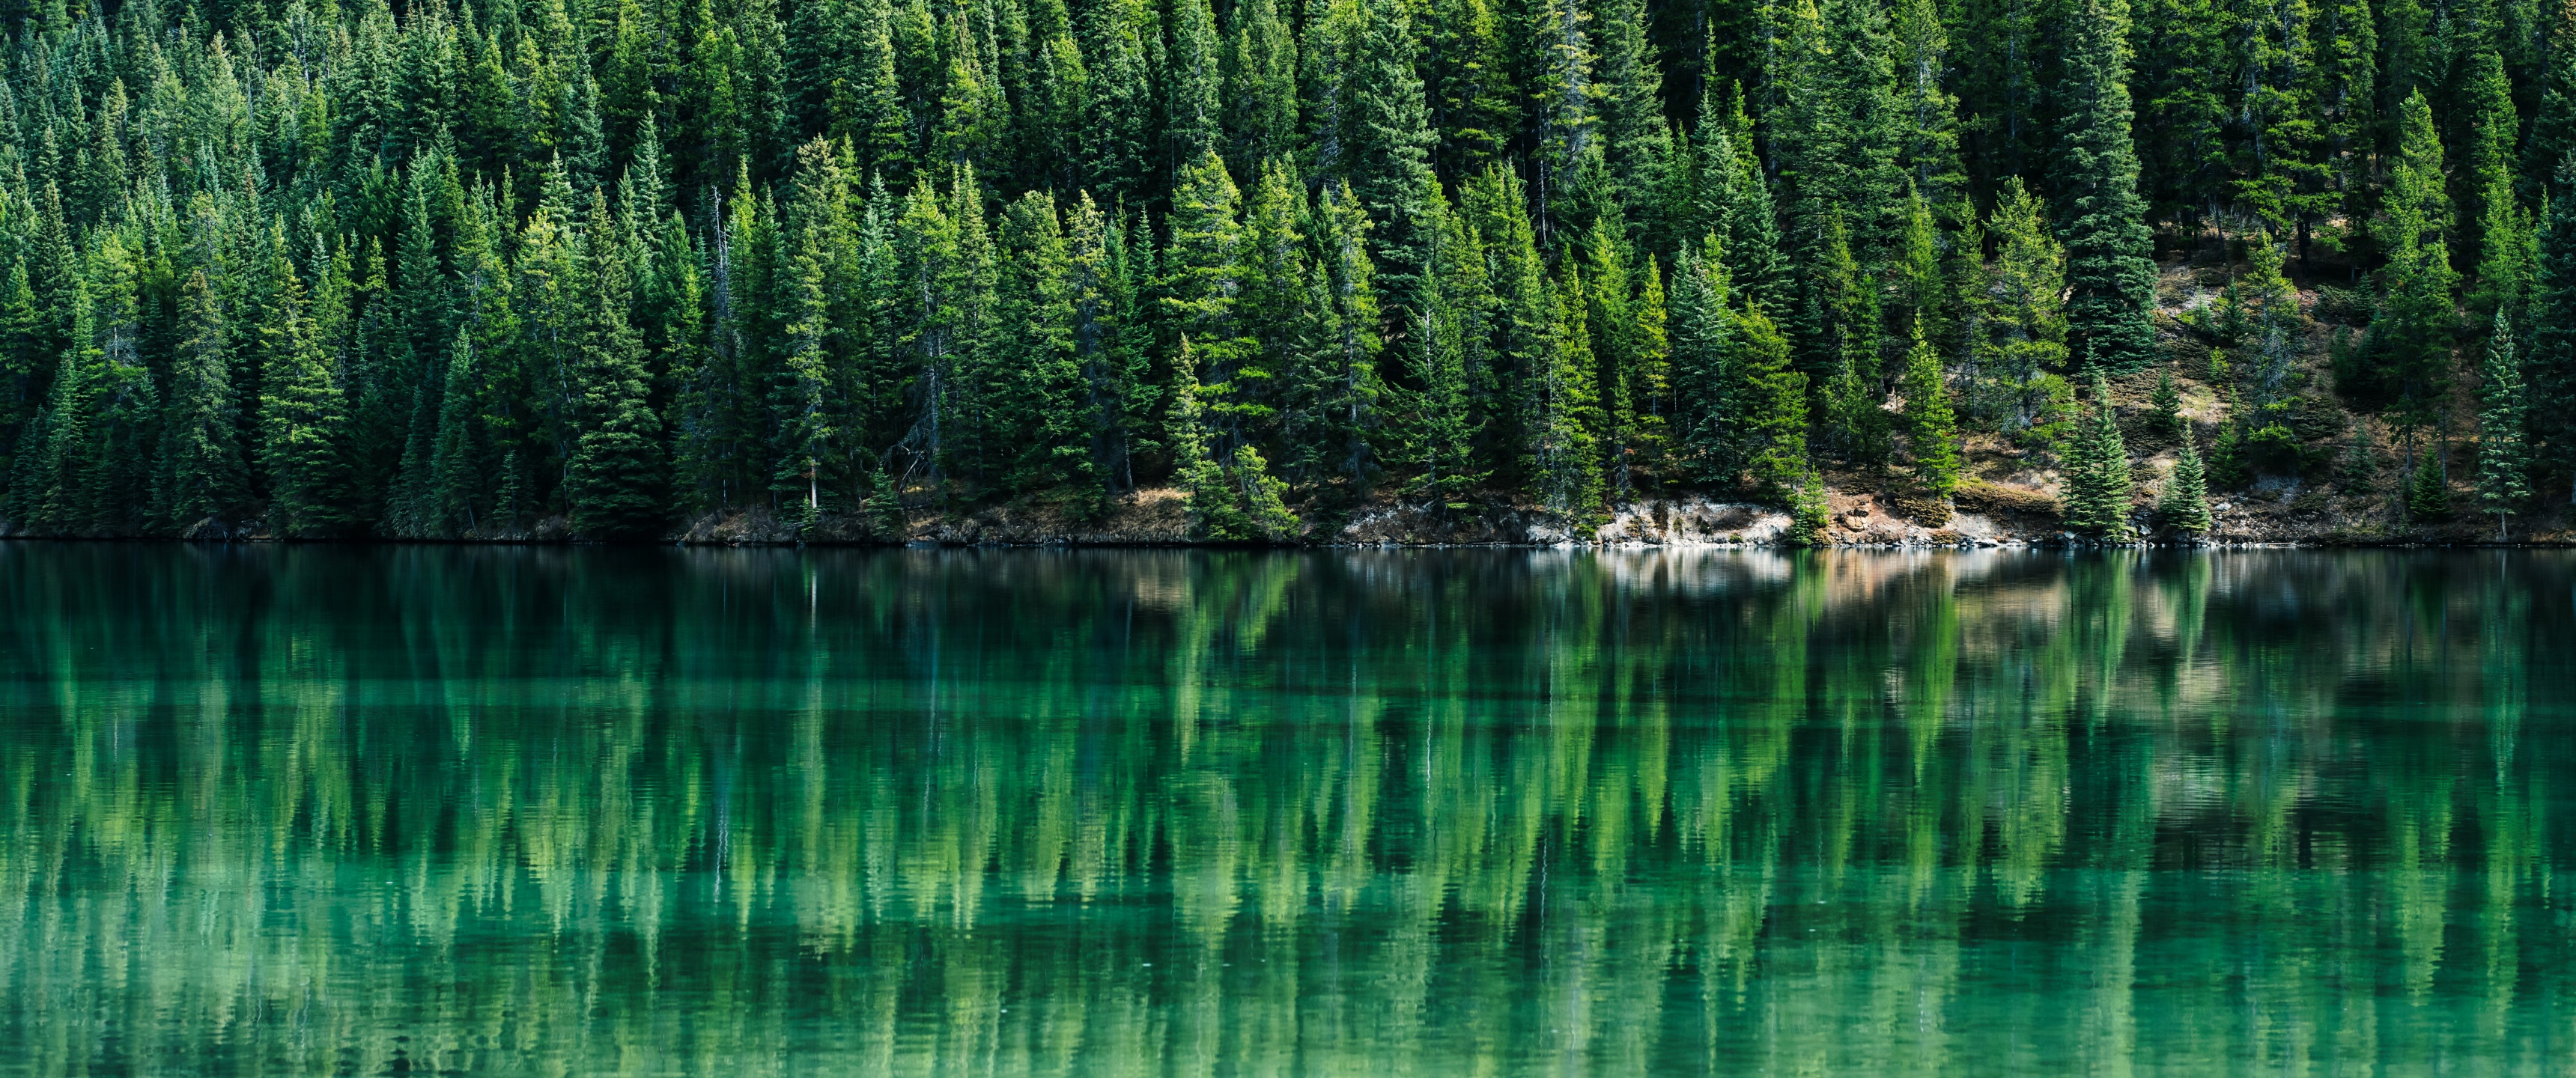 Green Trees Wallpaper 4K, Pine trees, Reflections, Nature, #6315